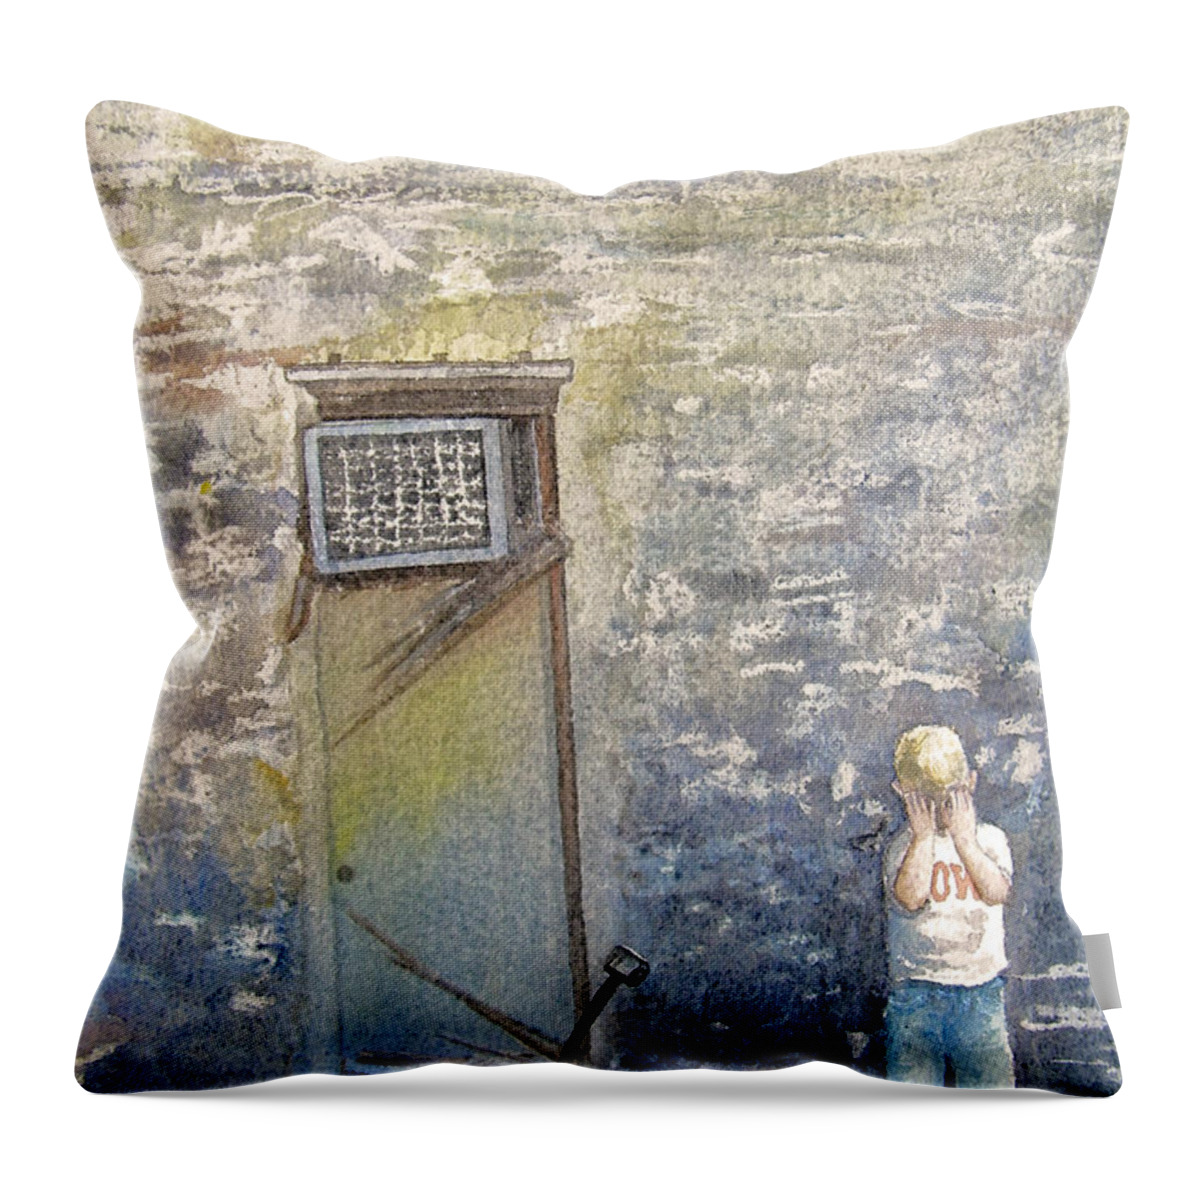 Child Throw Pillow featuring the painting Alone by Gale Cochran-Smith